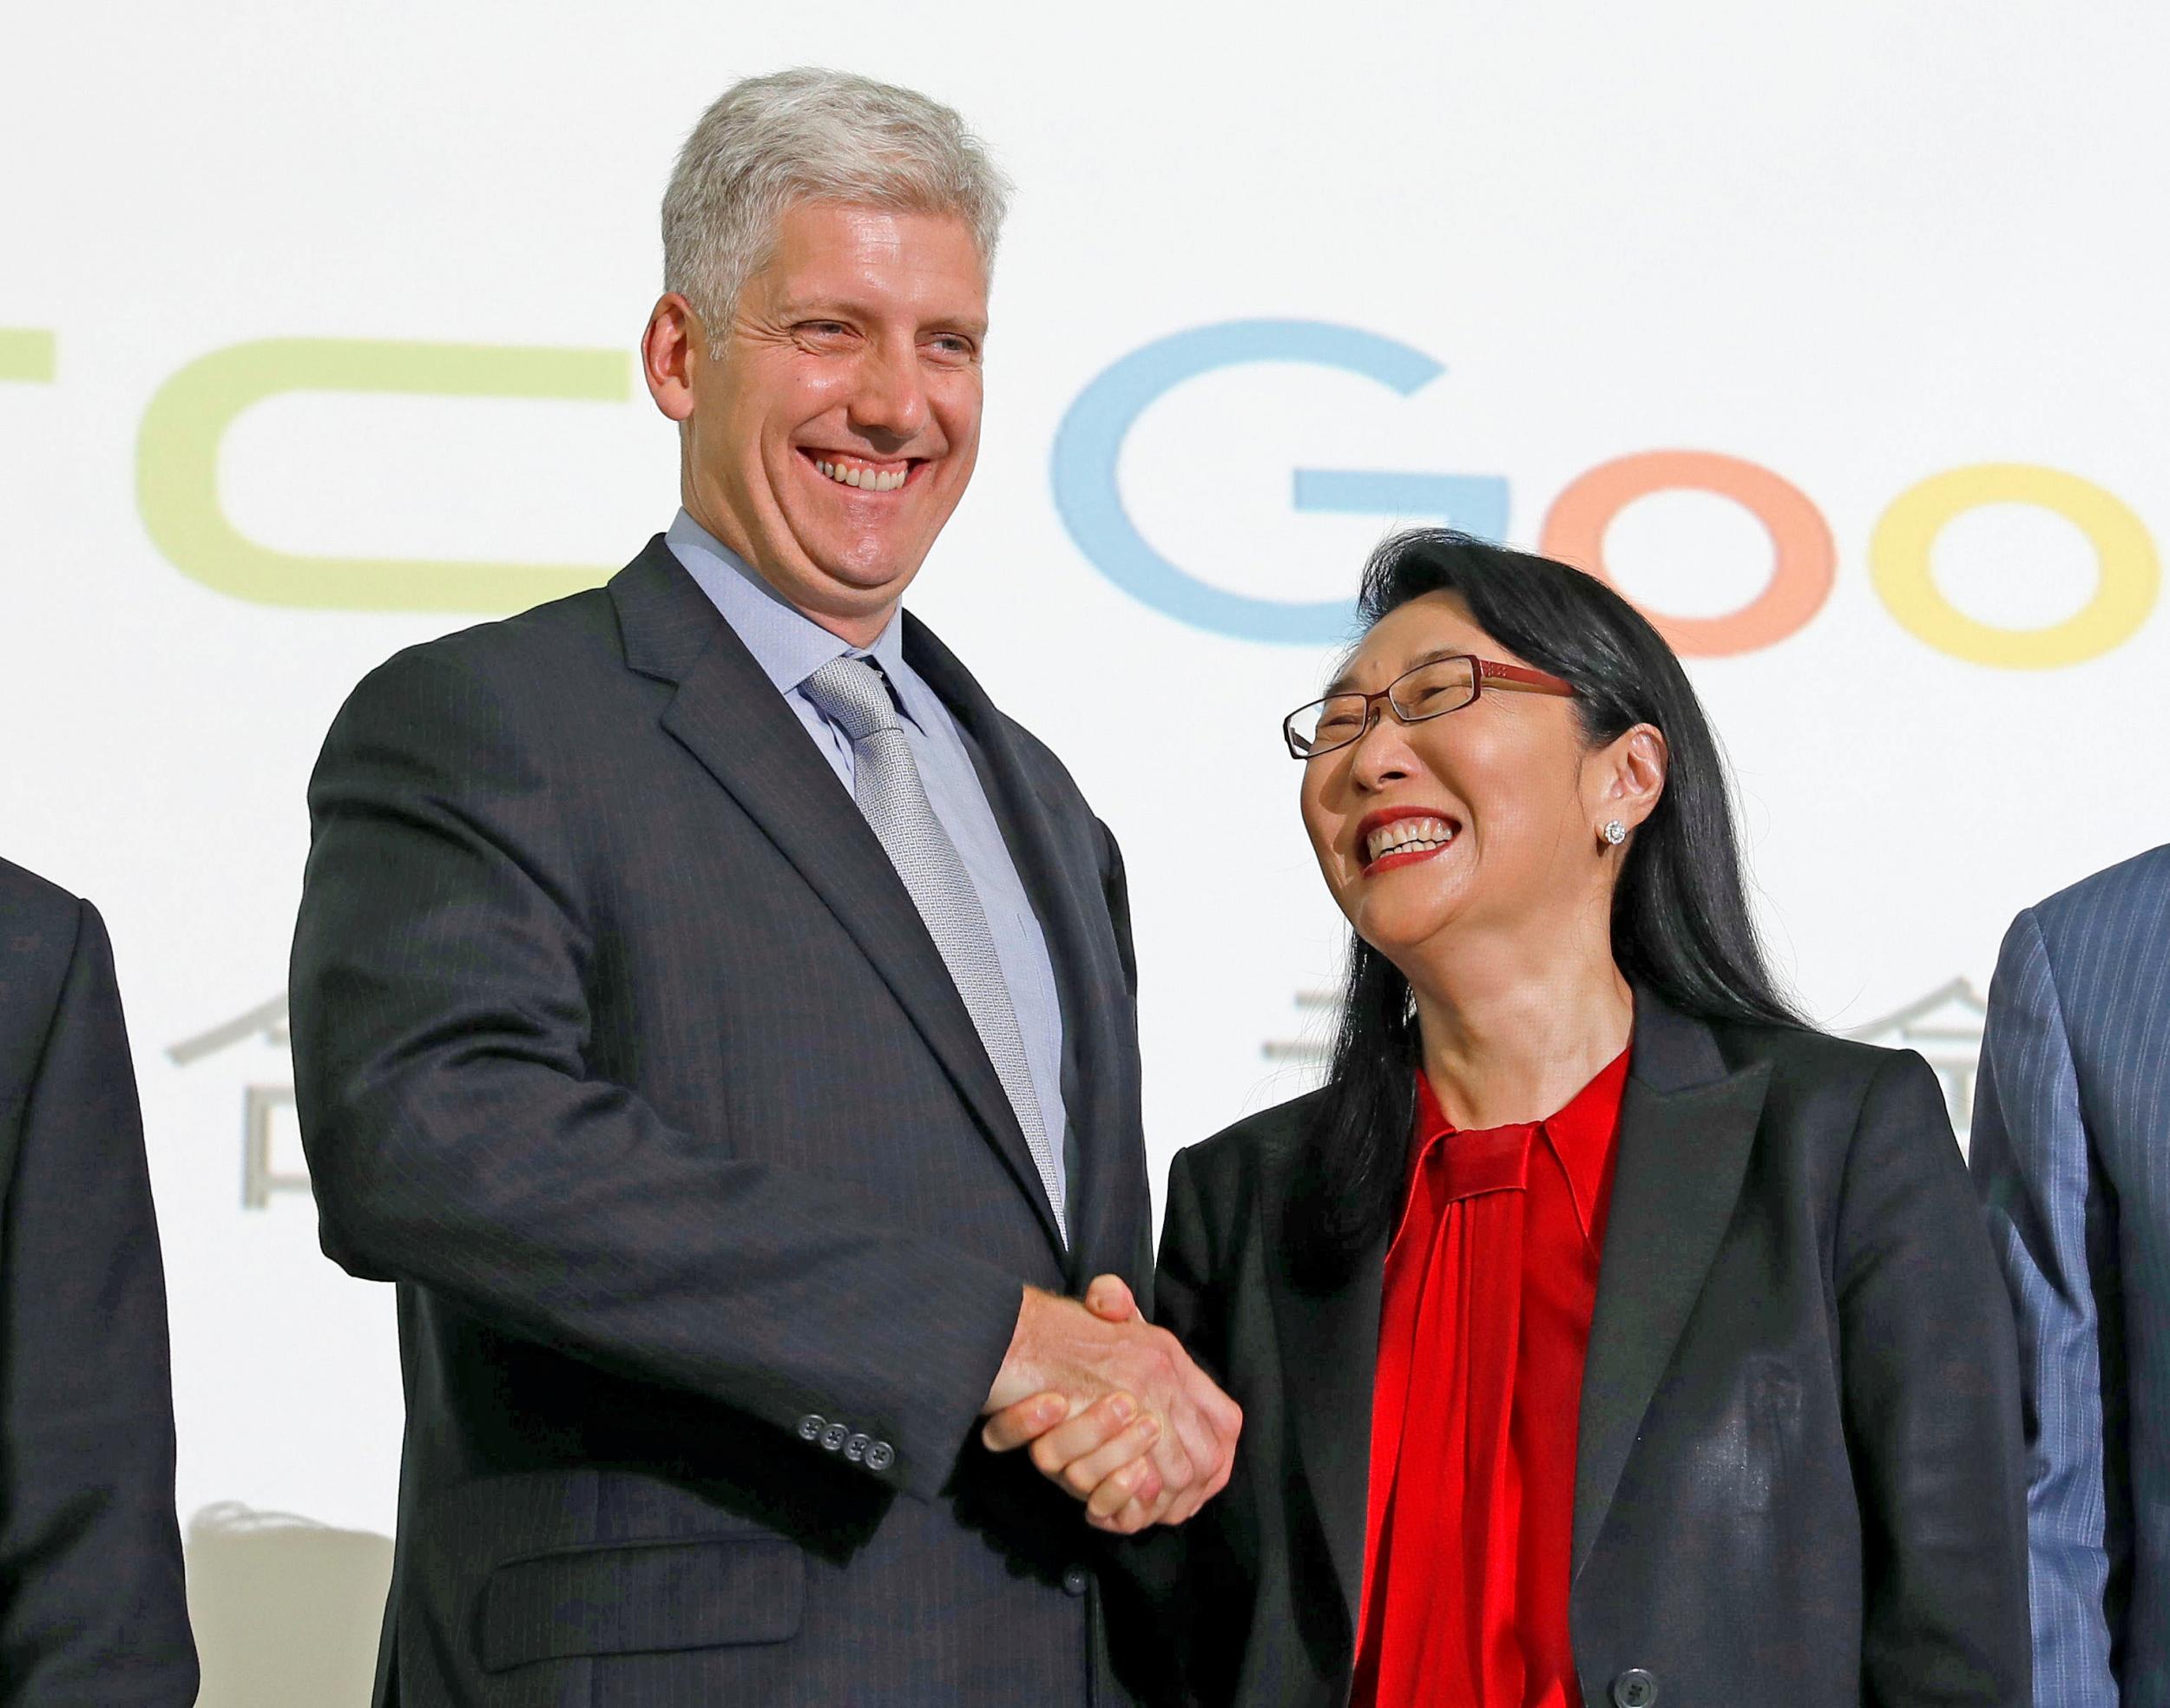 Google hardware executive Rick Osterloh shakes hand with HTC CEO Cher Wang